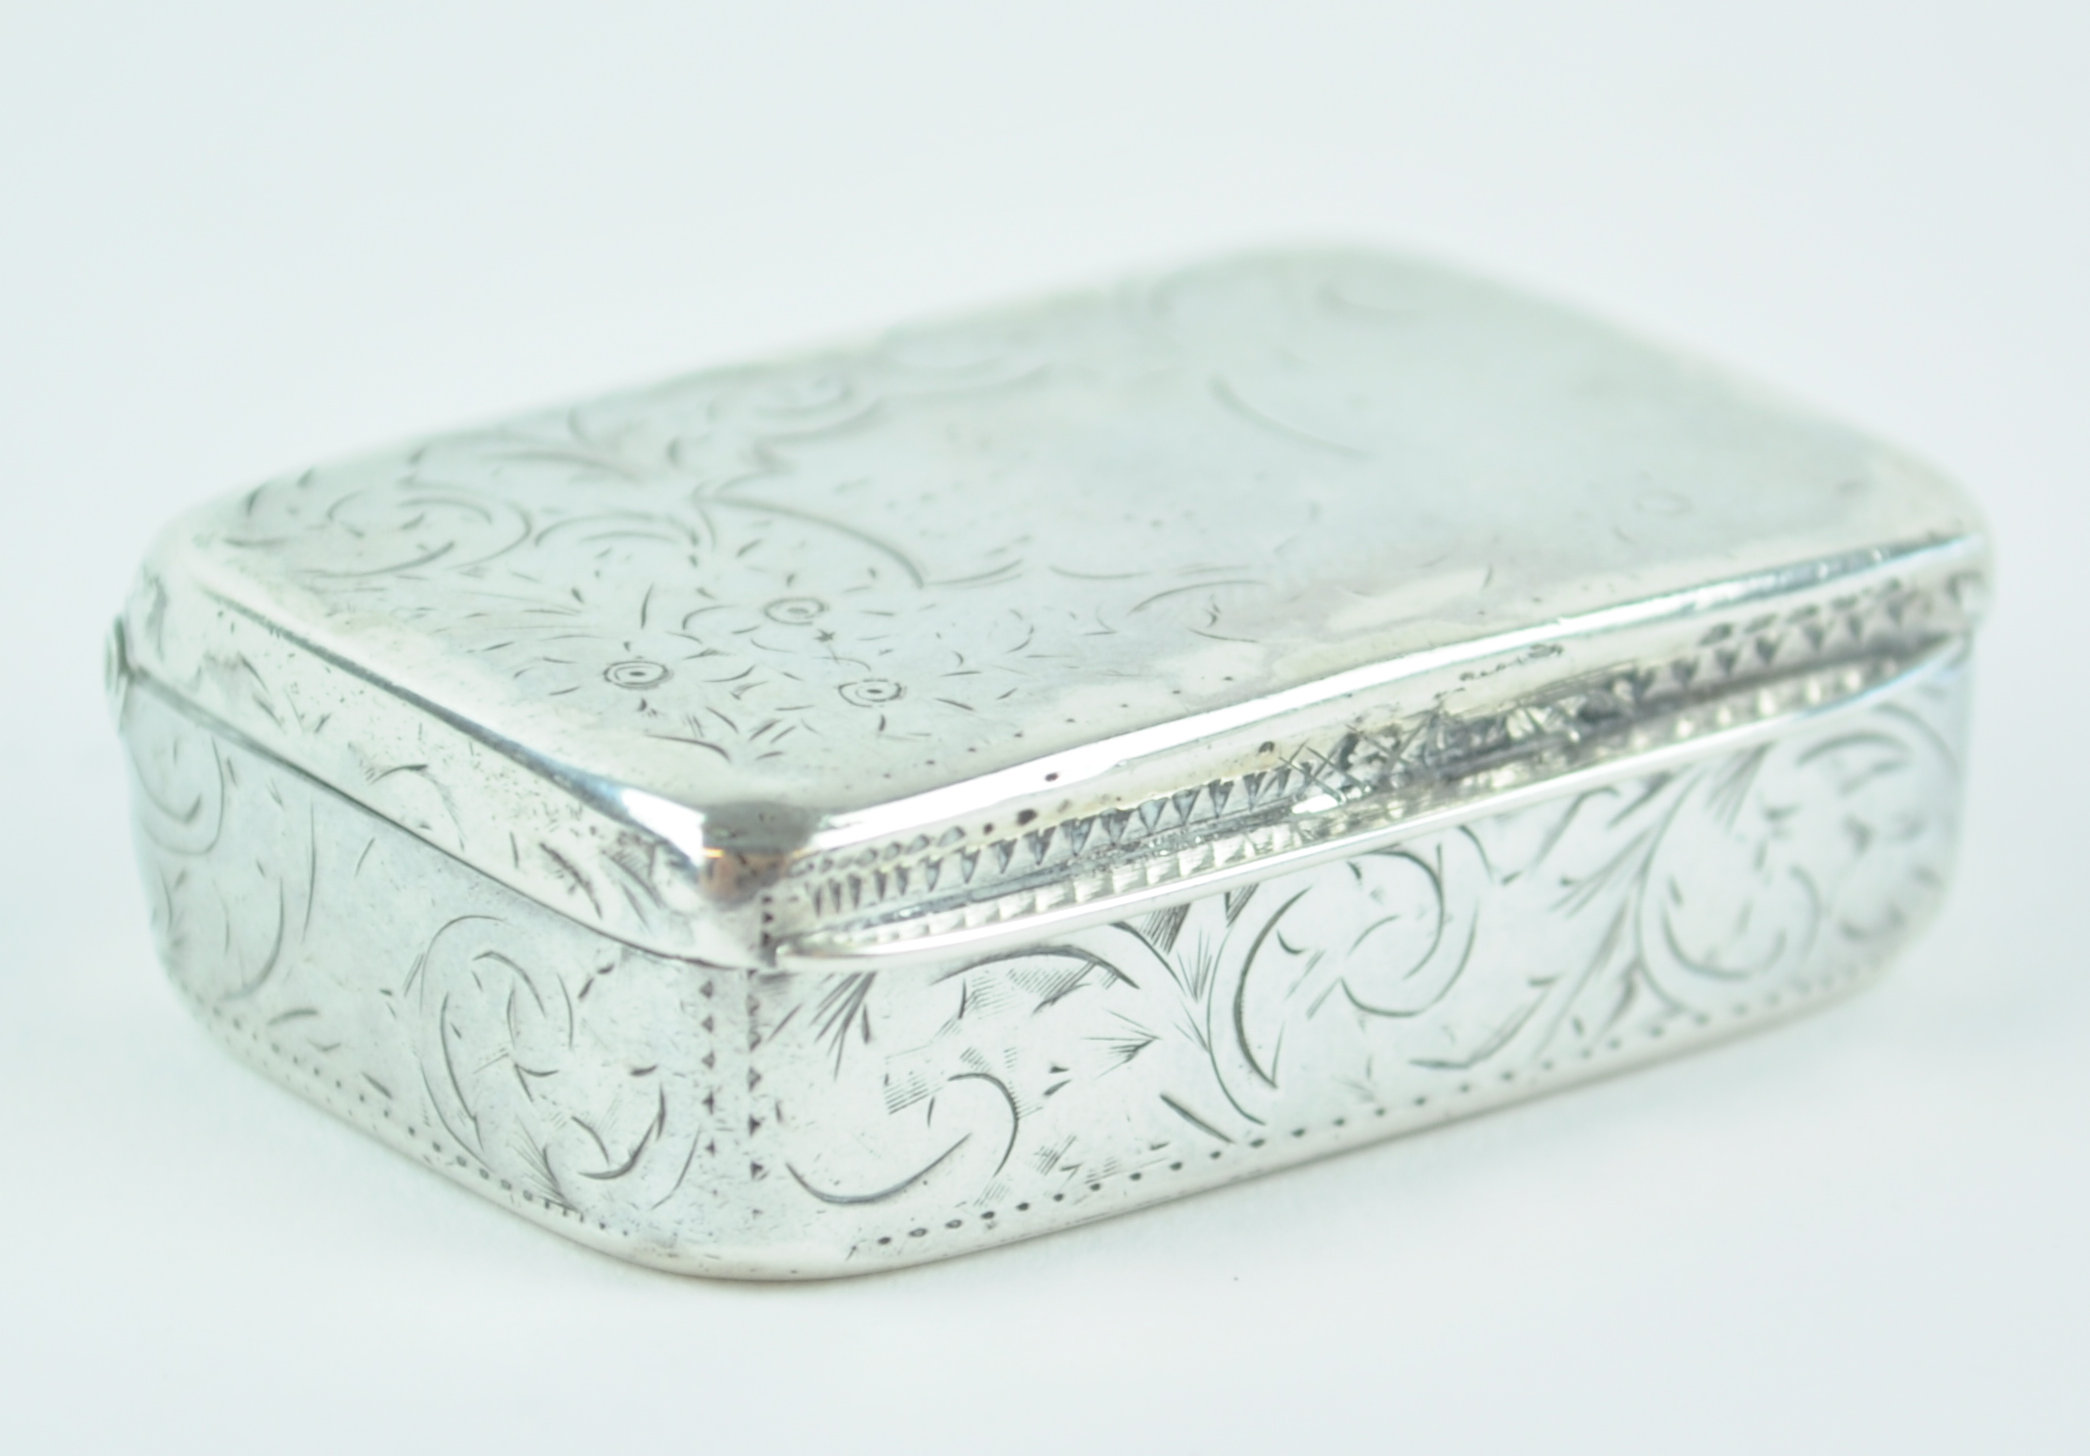 A silver snuff box of rectangular form,with scroll engraved sides and lid, Birmingham 1800, 1.